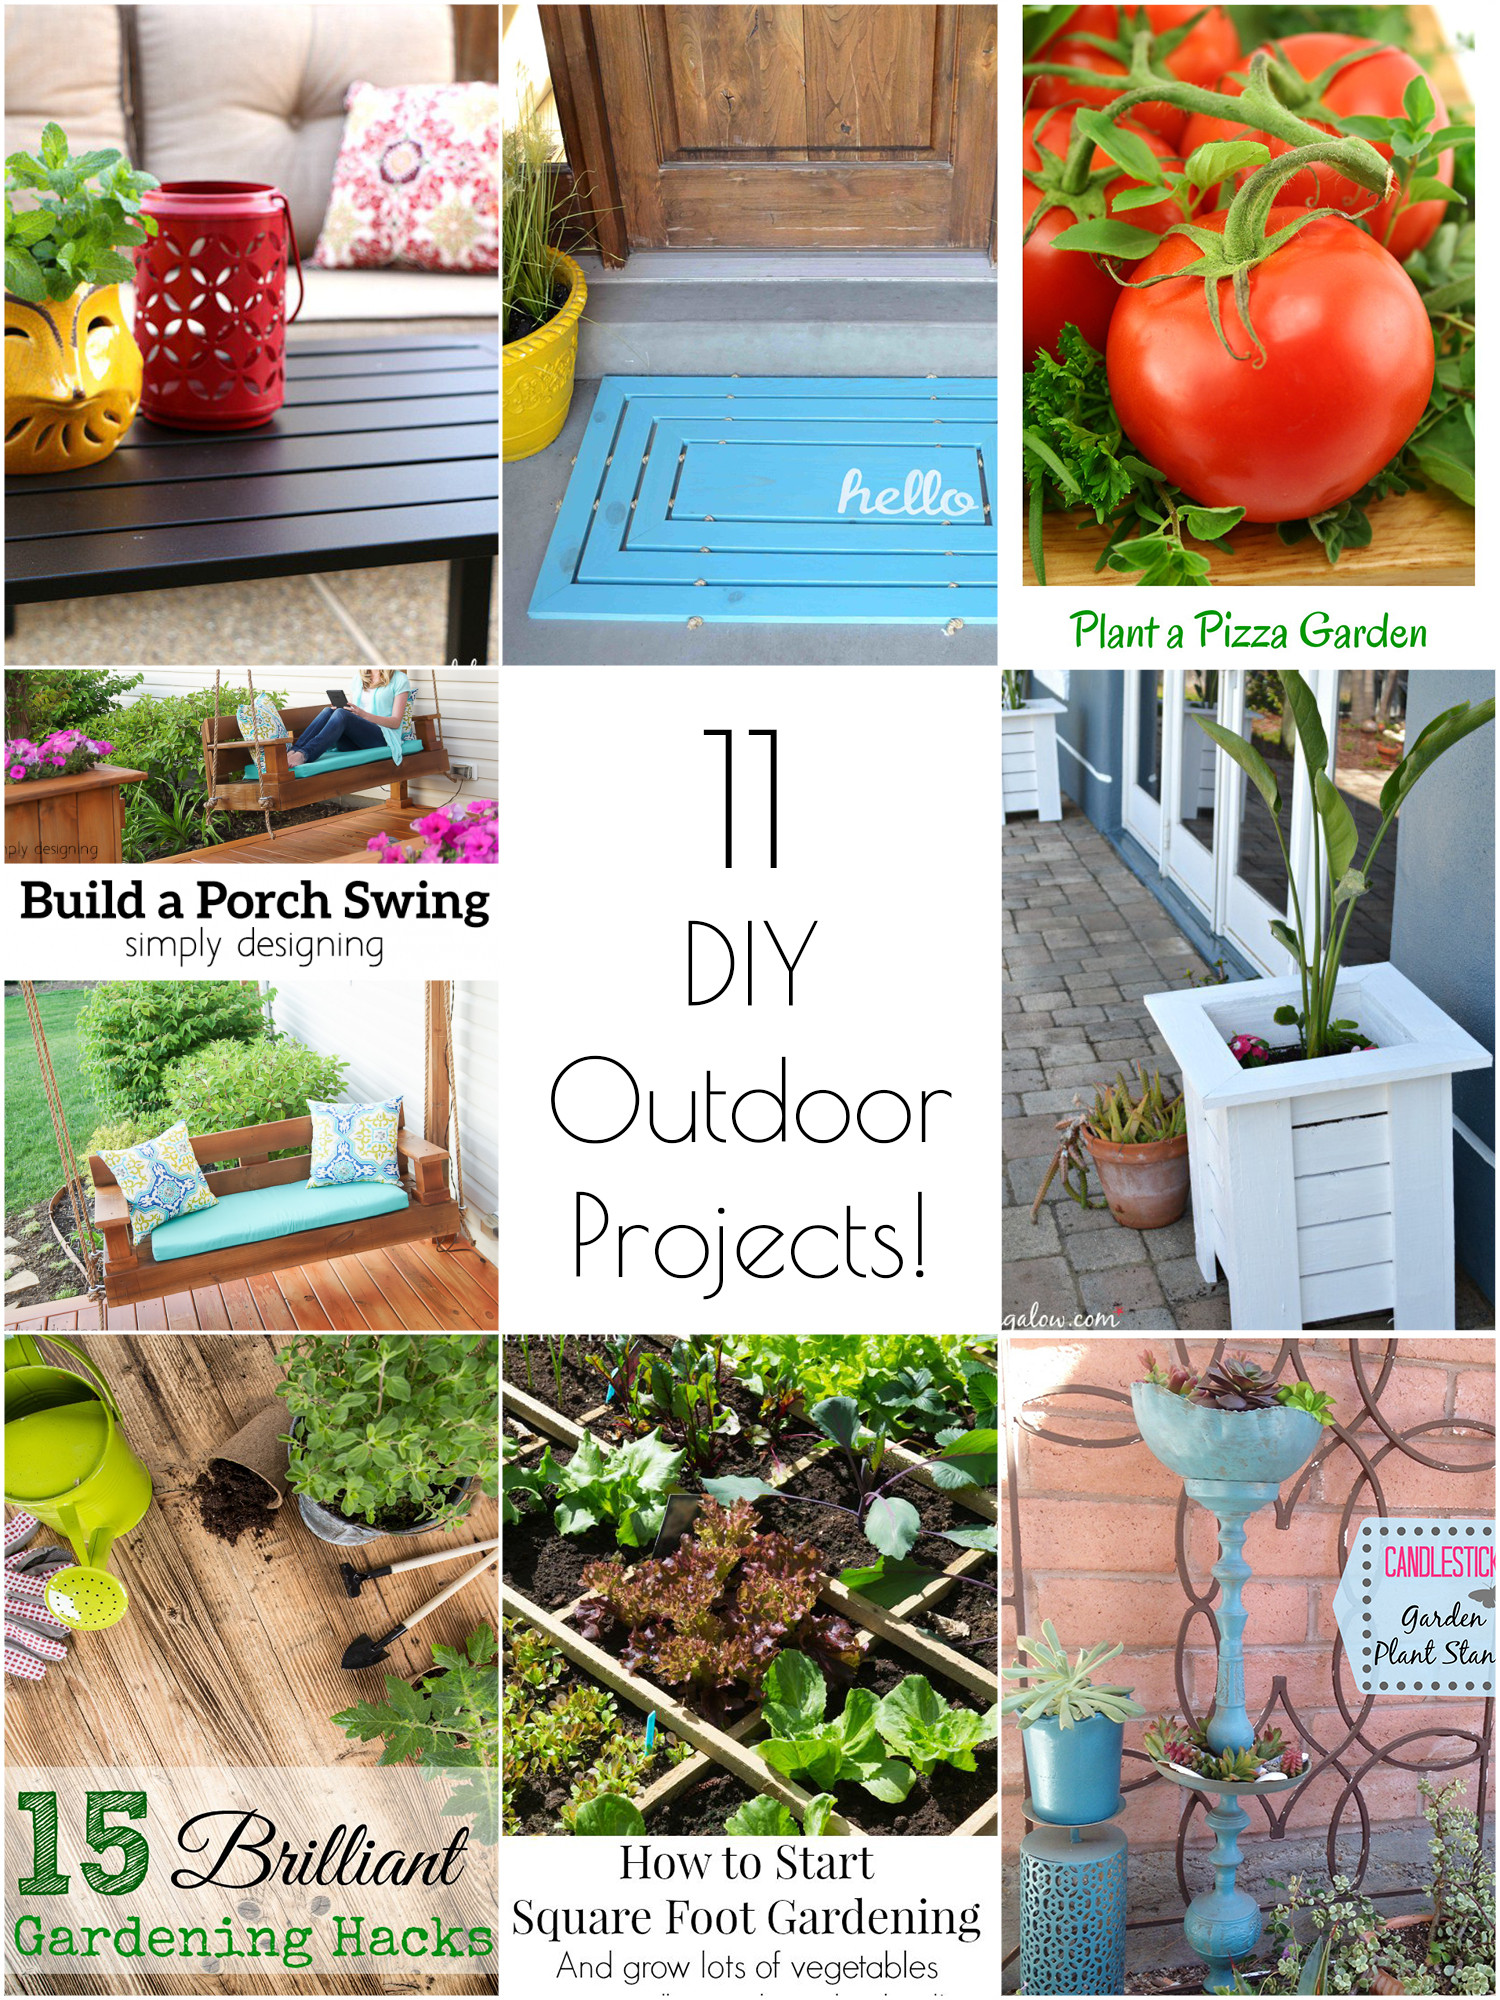 Outdoor DIY Projects
 So Creative 11 Amazing DIY Outdoor Projects